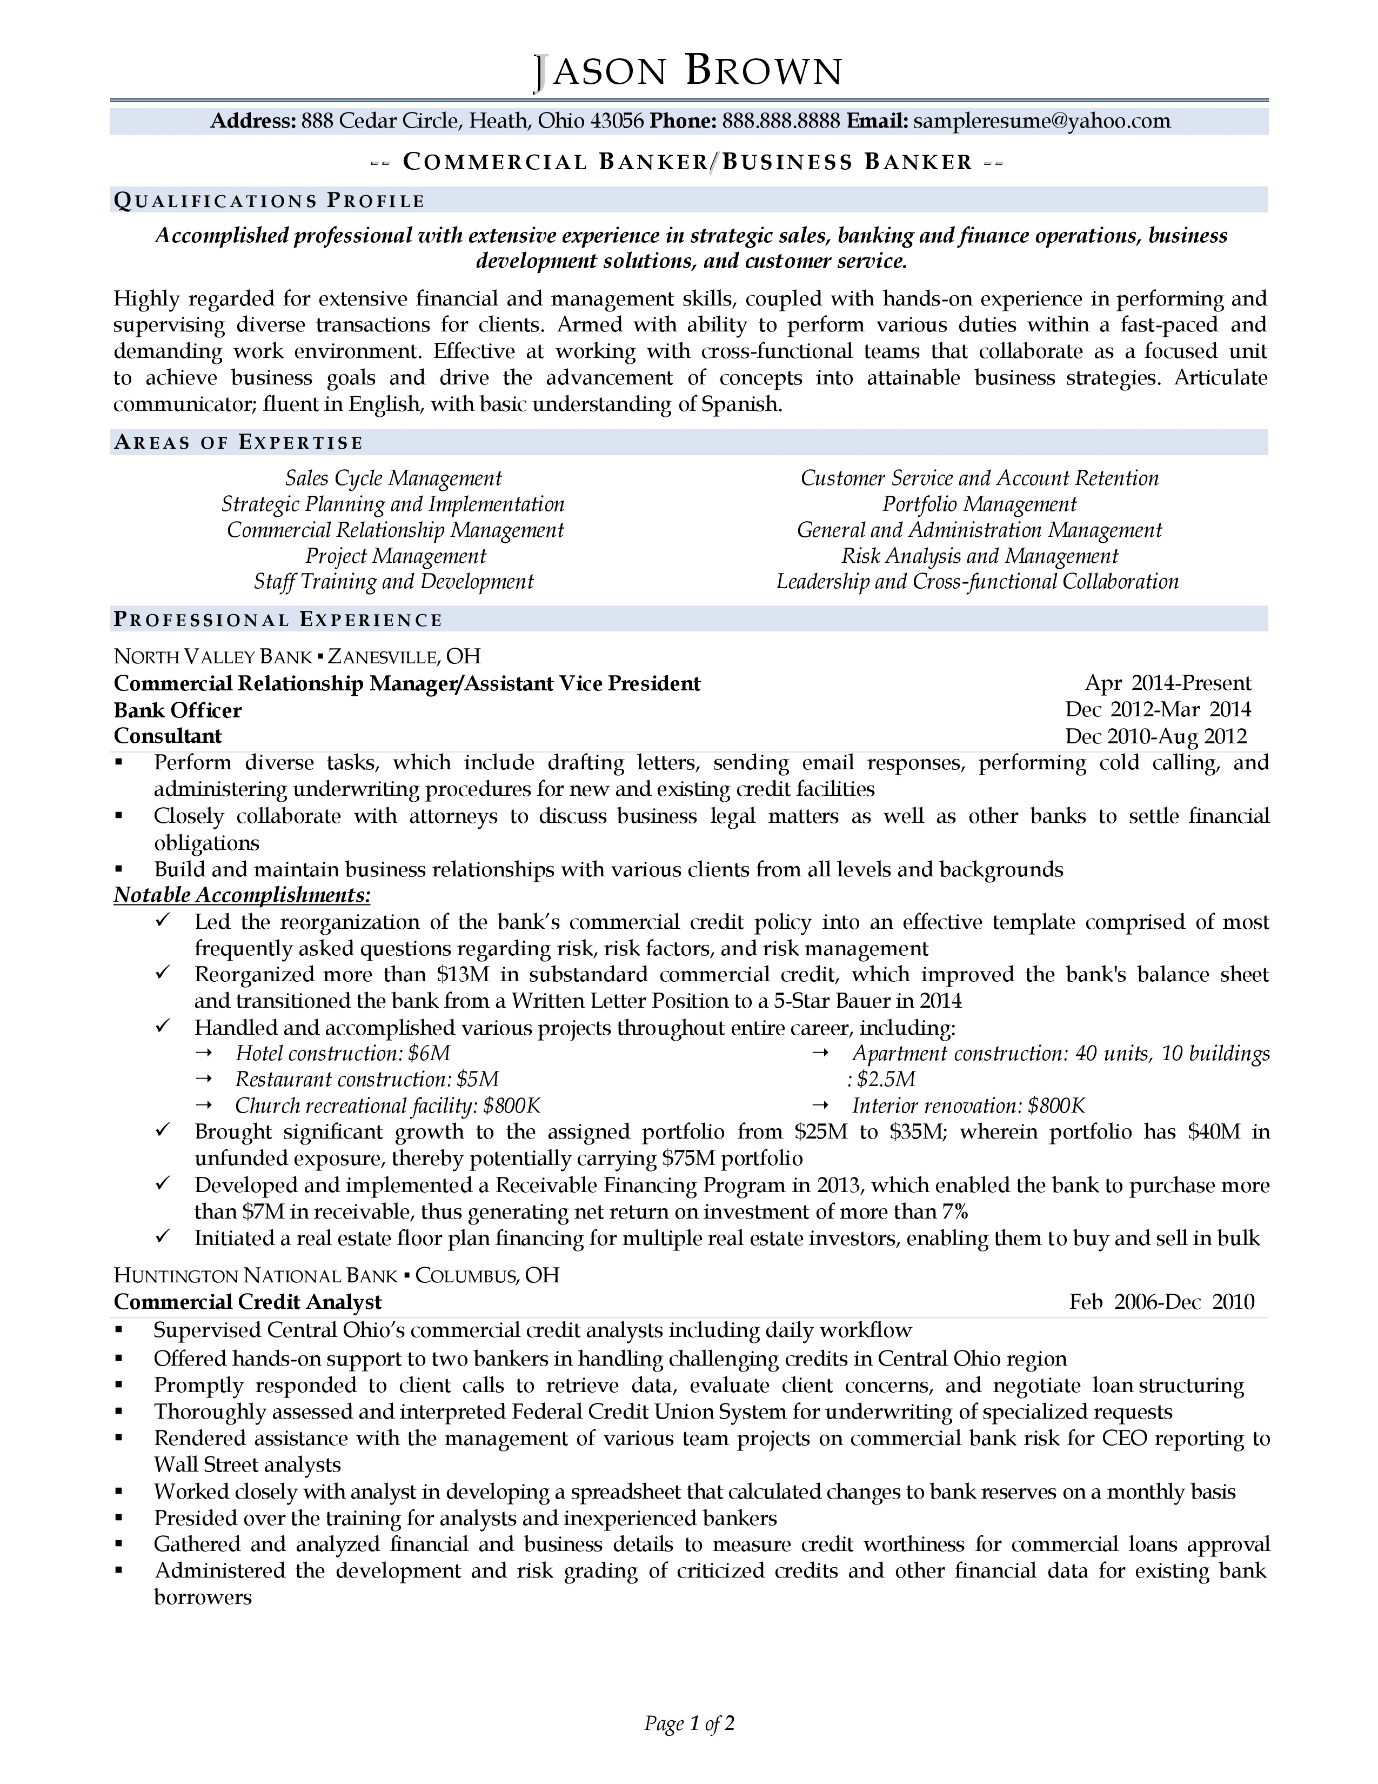 Business Banker Resume Examples Page 01  